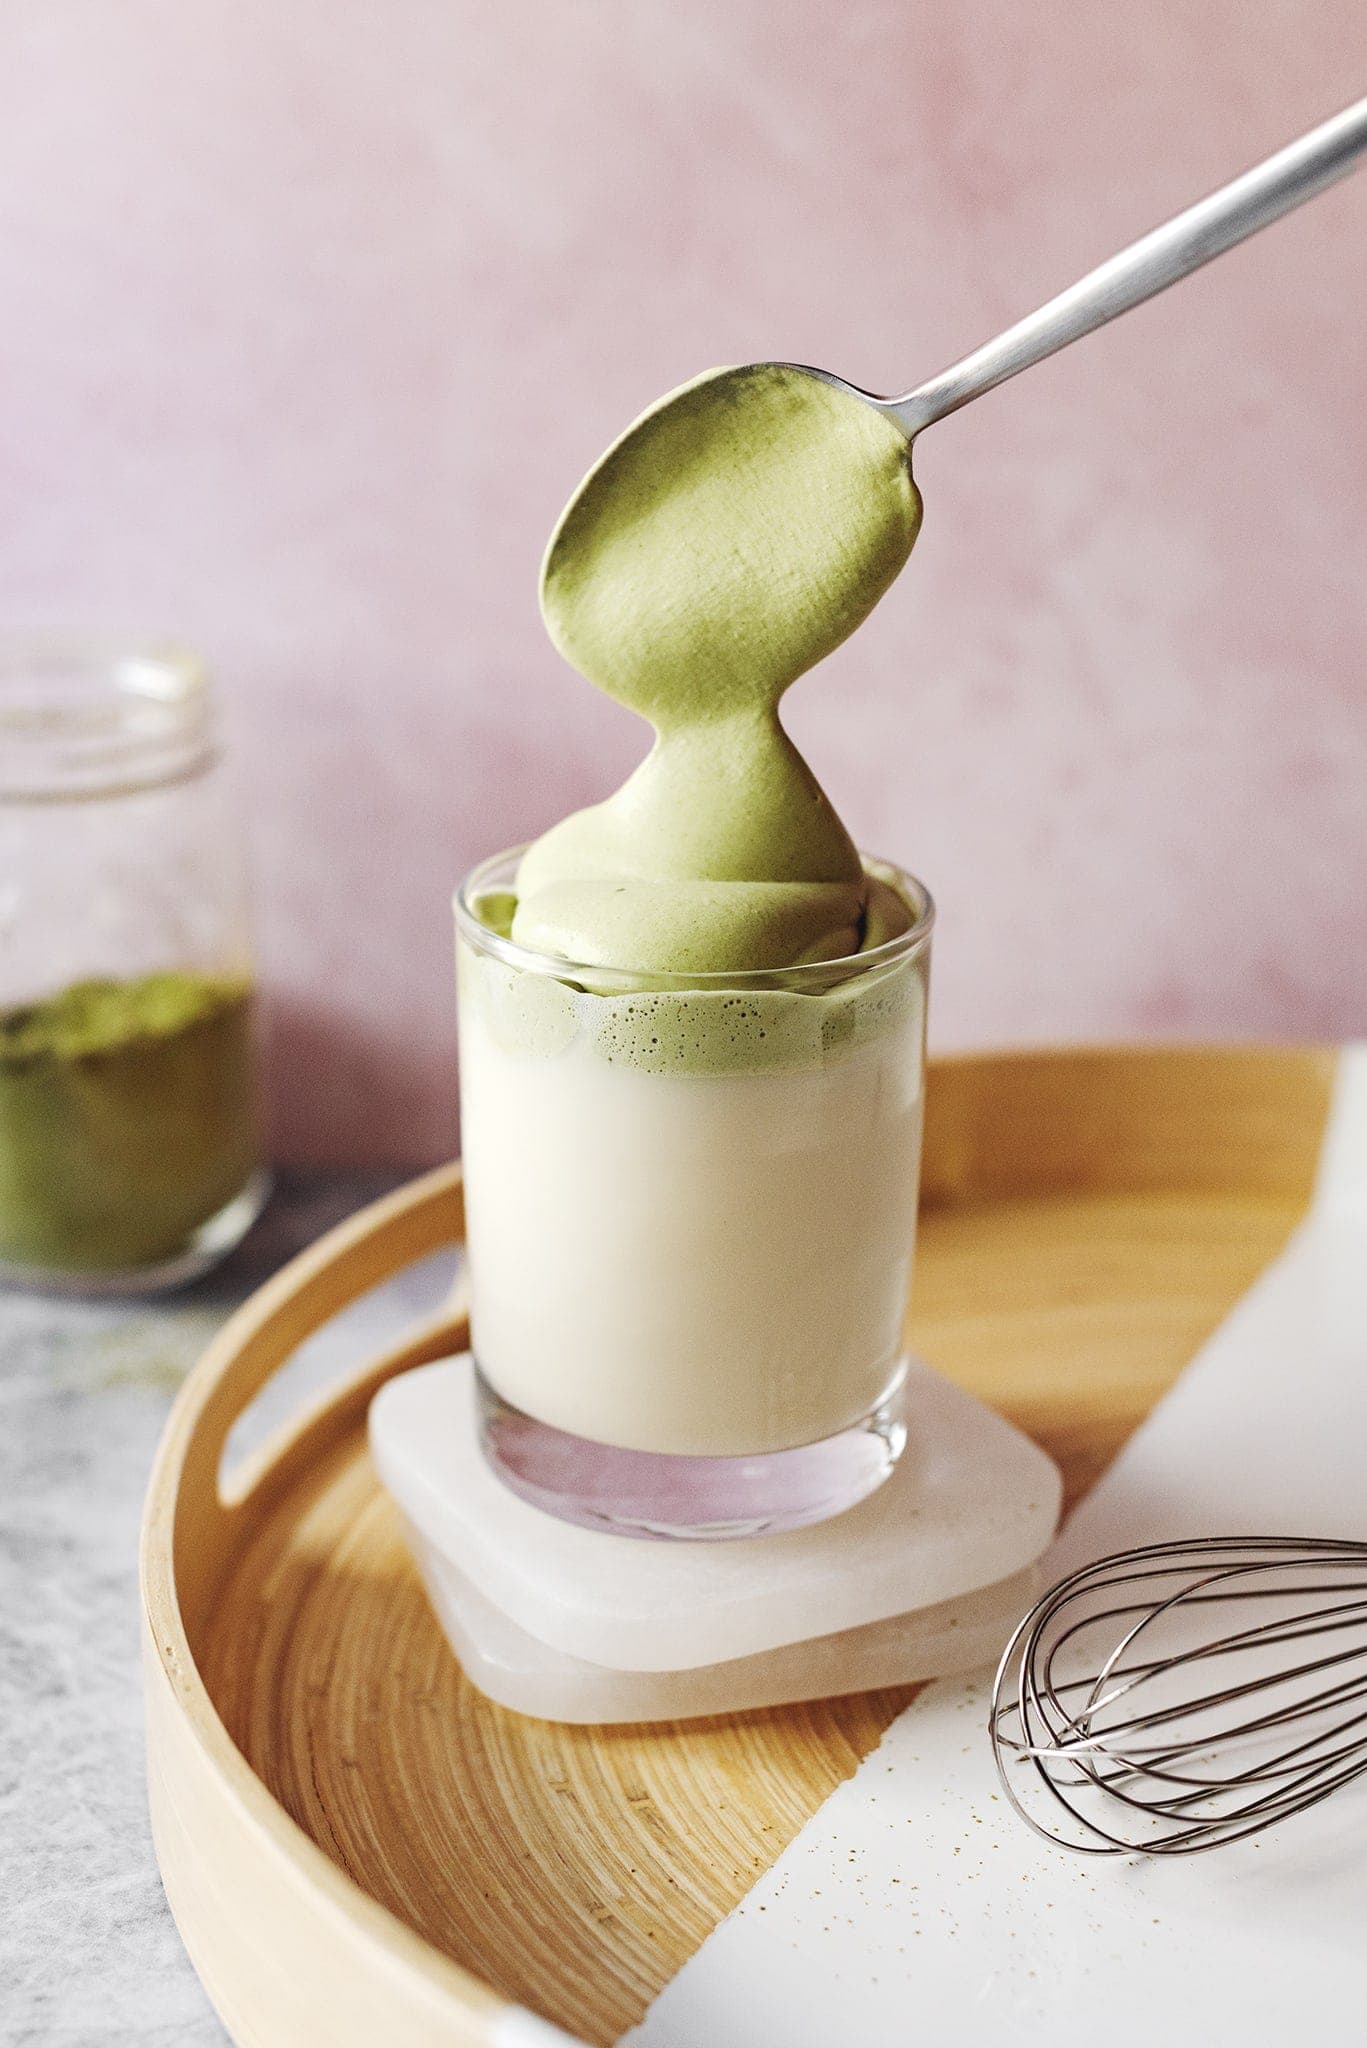 Spooning whipped matcha cream into glass cup